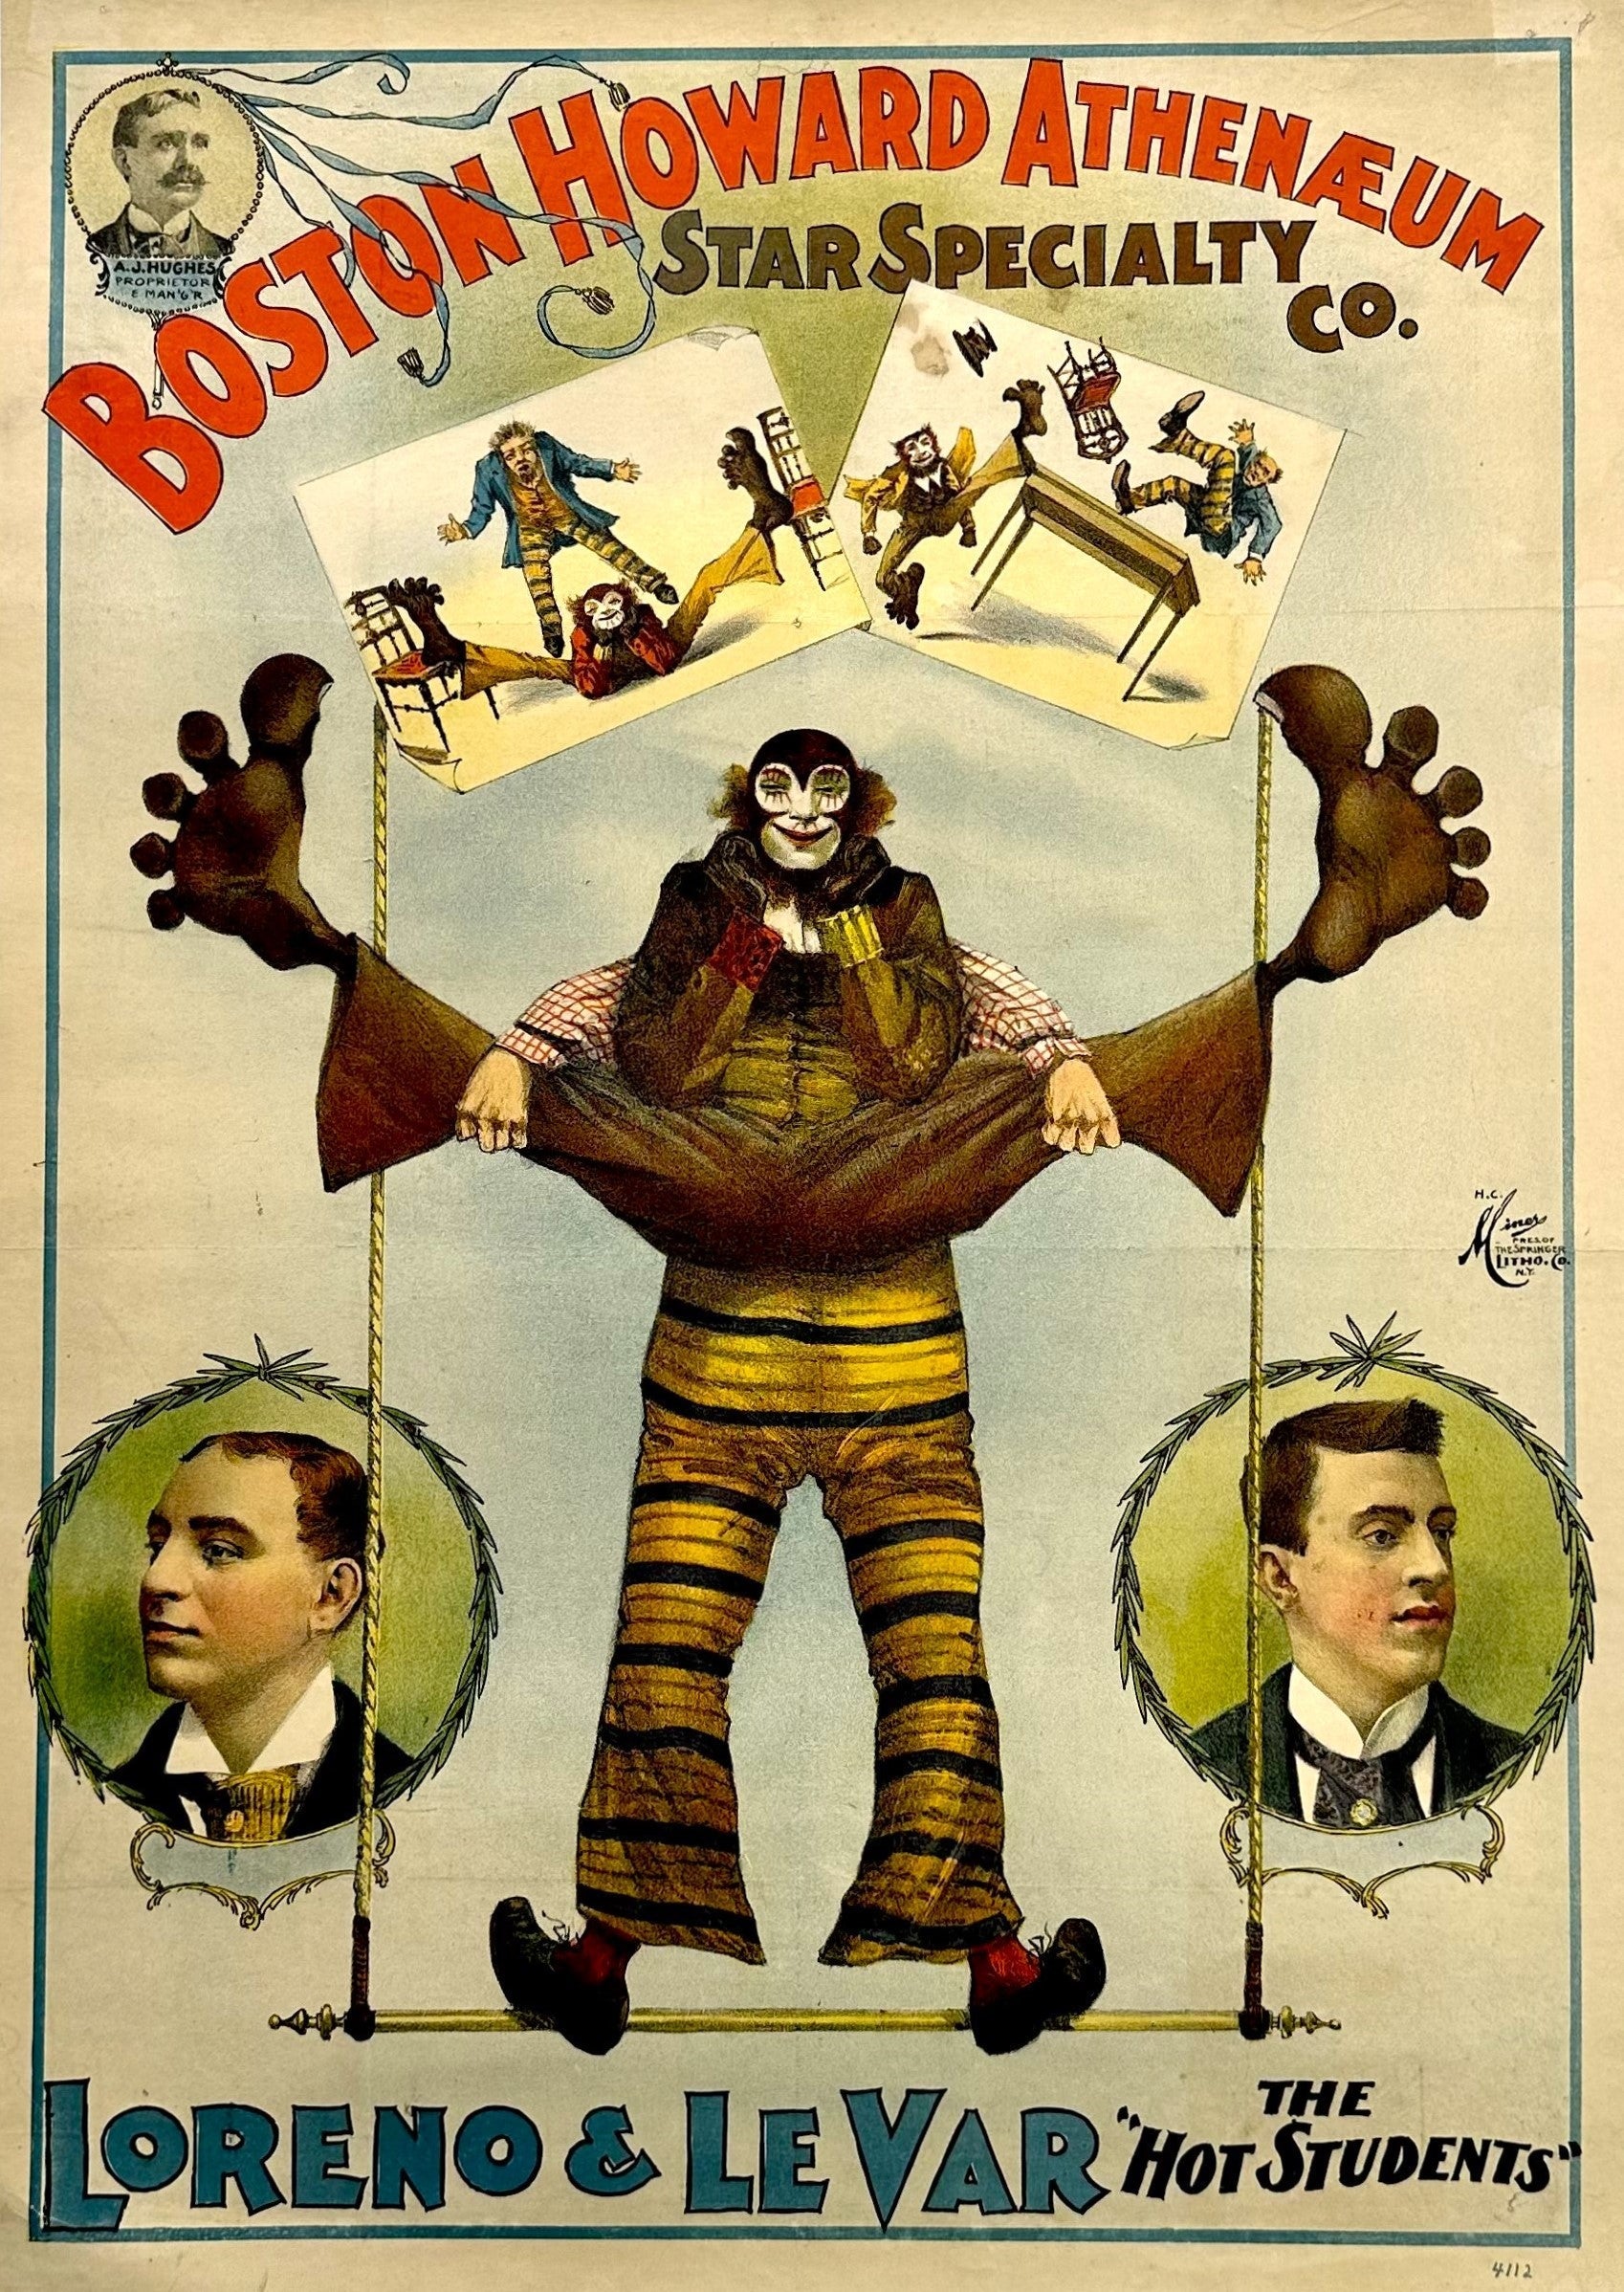 Boston Howard Circus - Authentic Vintage Poster